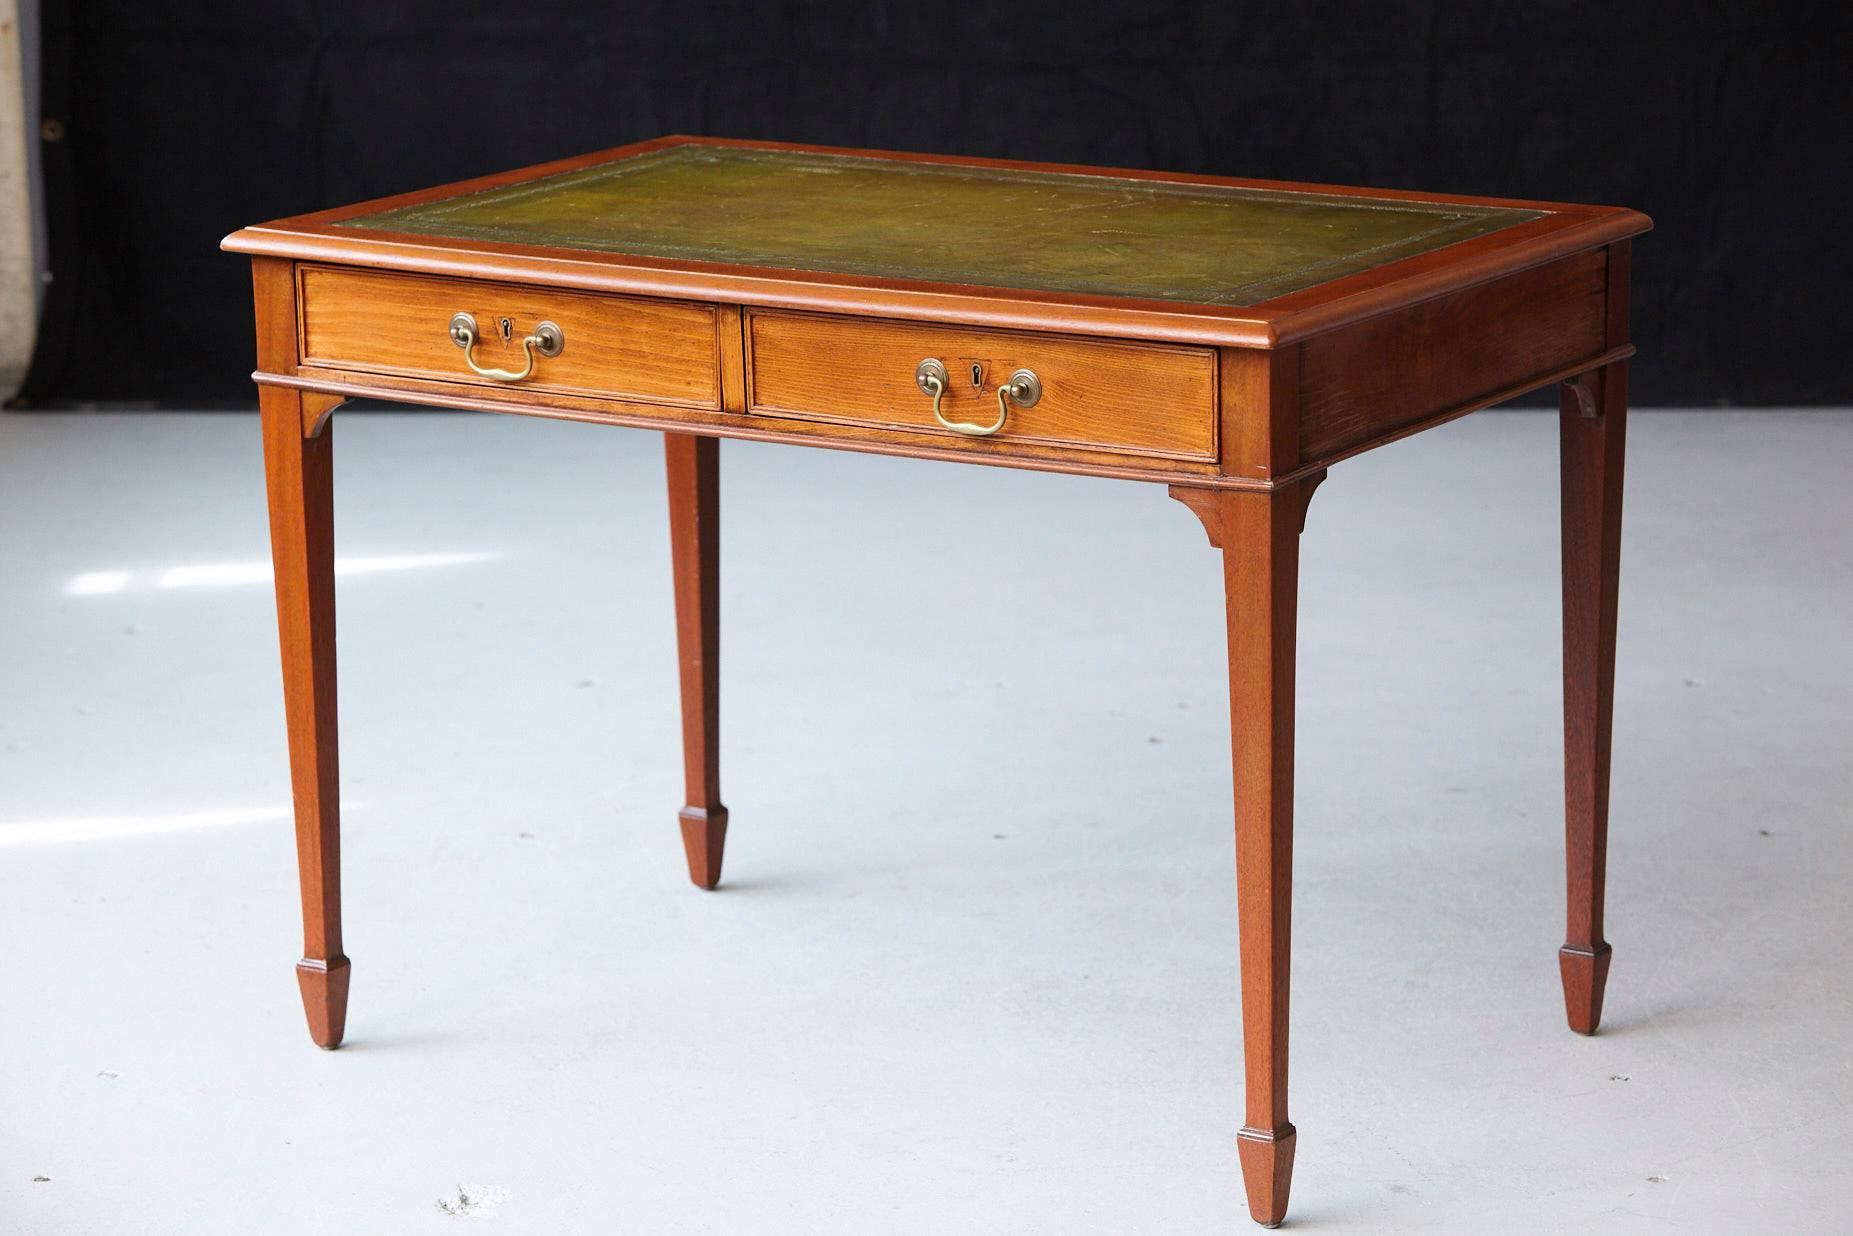 20th Century French Neoclassical Style Walnut Leather Top Desk